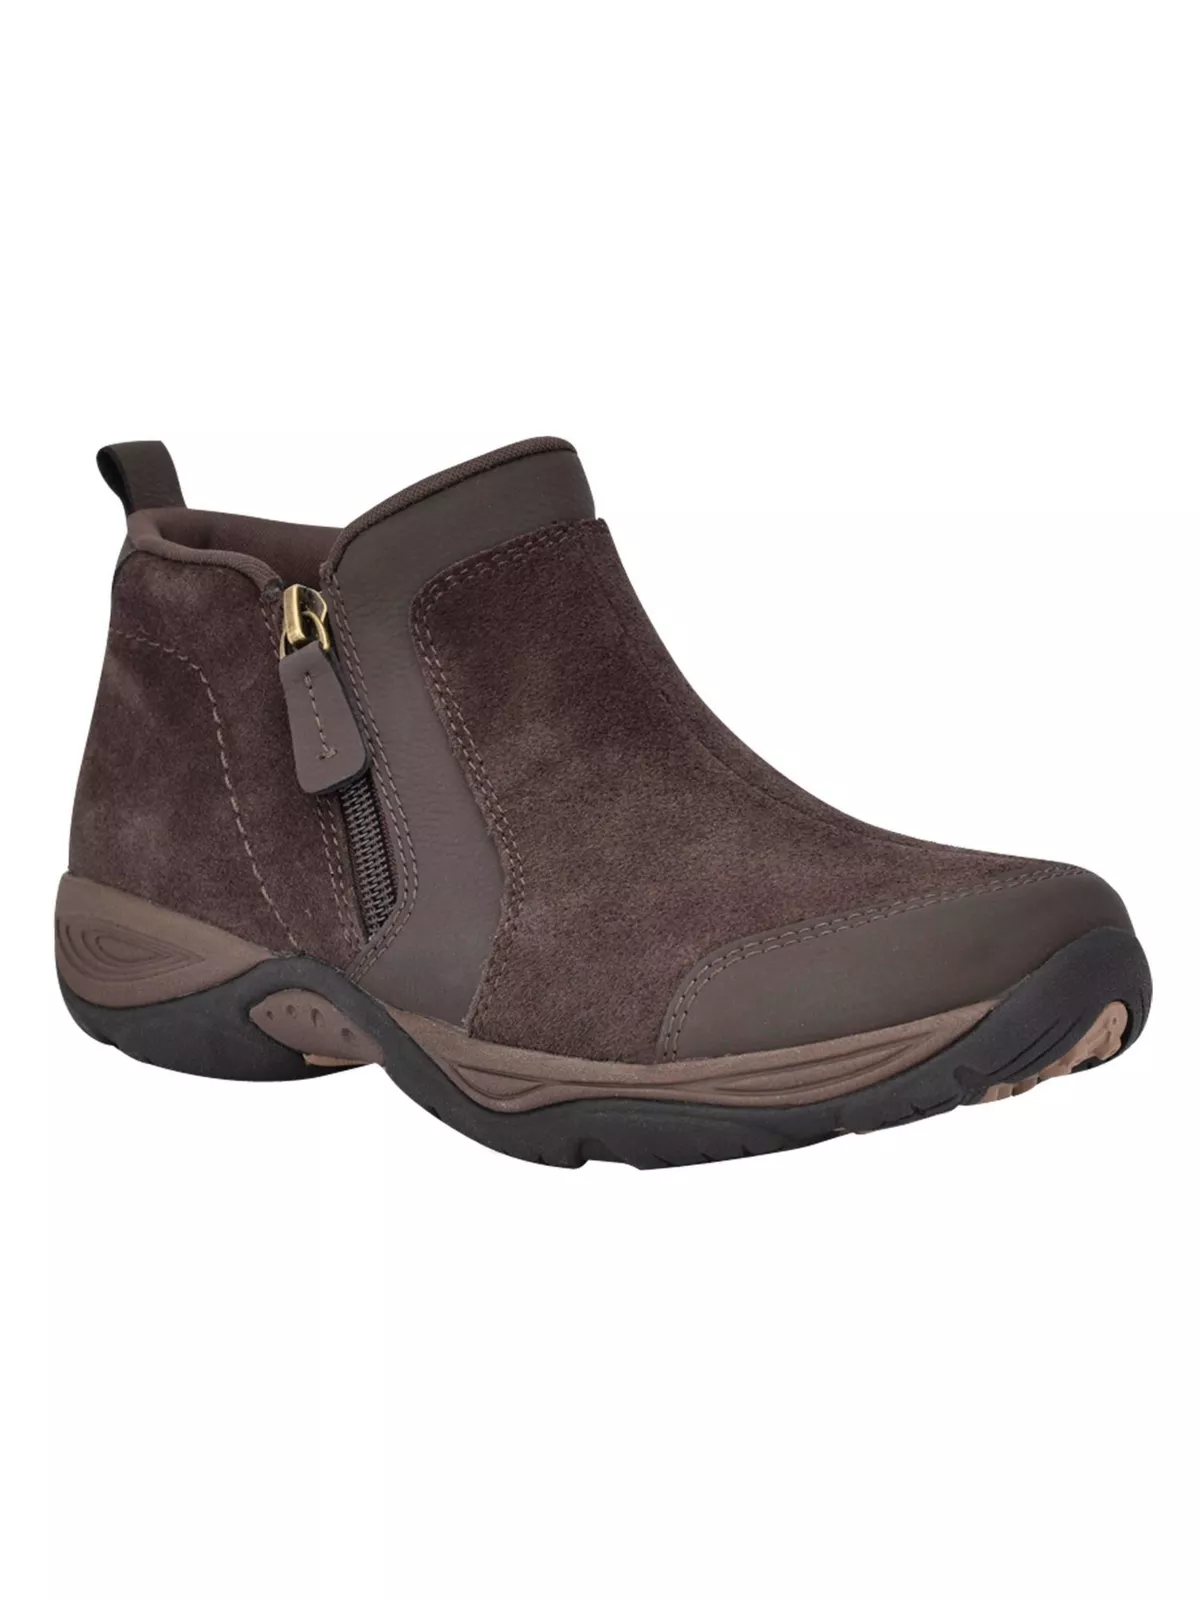 Step into comfort and style with the Easy Spirit Women's Epic Round Boots. These boots are crafted to provide both practicality and fashion, making them perfect for everyday wear. Material: The boots are made from high-quality synthetic leather in a rich chocolate color, offering a luxurious look and feel. Design: Featuring a sleek round toe design, these boots combine classic aesthetics with modern comfort. The simple yet elegant silhouette makes them versatile for various outfits and occasions. Comfort: With a cushioned insole and soft lining, the boots ensure all-day comfort, reducing foot fatigue. The flexible outsole provides excellent traction and stability on different surfaces. Closure: These boots come with an easy pull-on design, eliminating the hassle of laces or zippers and allowing for quick and convenient wear. Heel: The low-stacked heel provides just the right amount of lift without compromising comfort, making these boots suitable for both casual and semi-formal settings. Whether you're heading to work, running errands, or enjoying a casual day out, the Easy Spirit Women's Epic Round Boots in chocolate are a reliable choice for style and comfort.